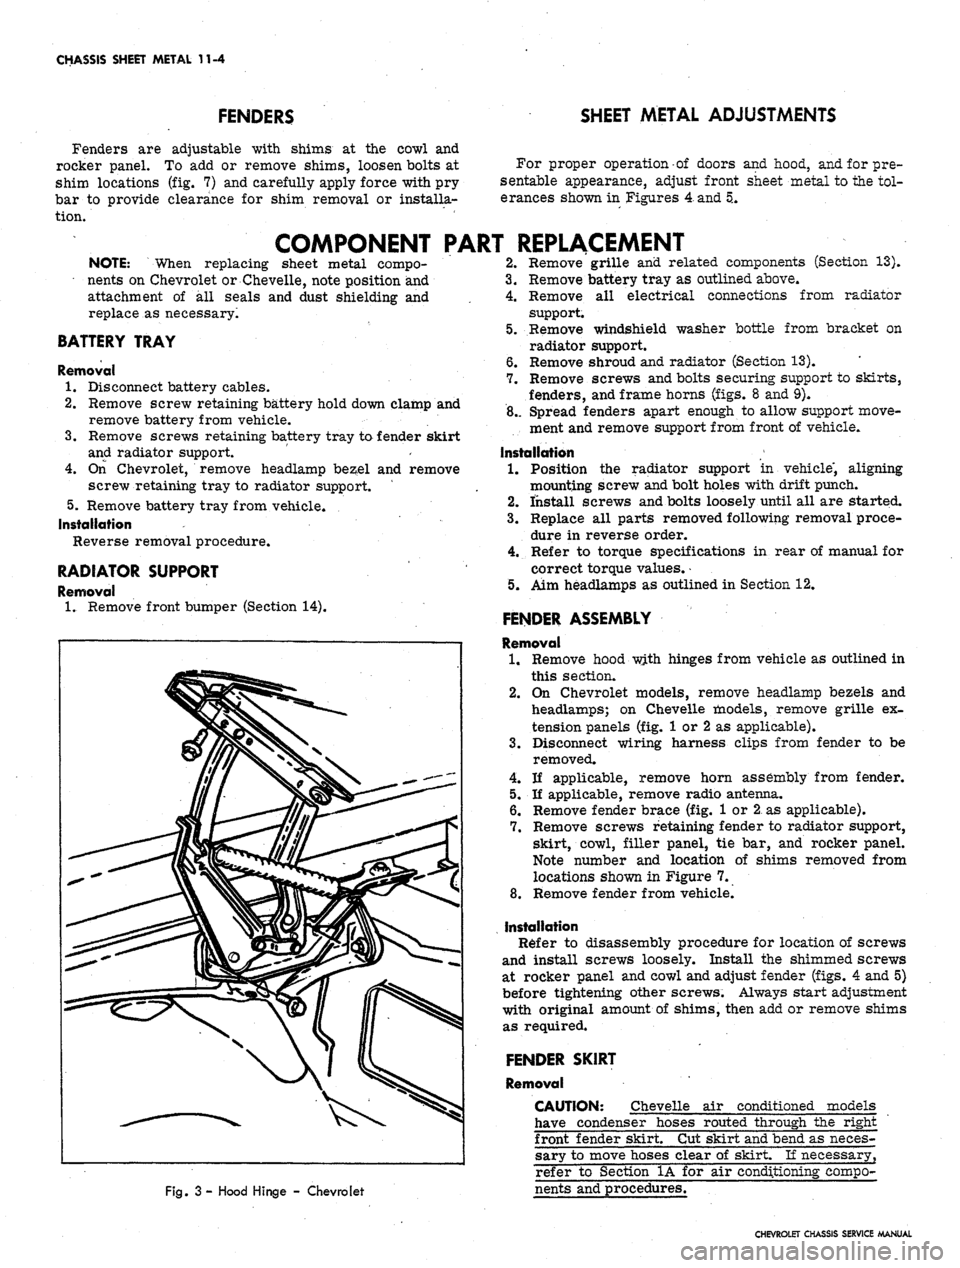 CHEVROLET CAMARO 1967 1.G Chassis Workshop Manual 
CHASSIS SHEET METAL 11-4

FENDERS

Fenders are adjustable with shims at the cowl and

rocker panel. To add or remove shims, loosen bolts at

shim locations (fig. 7) and carefully apply force with pry